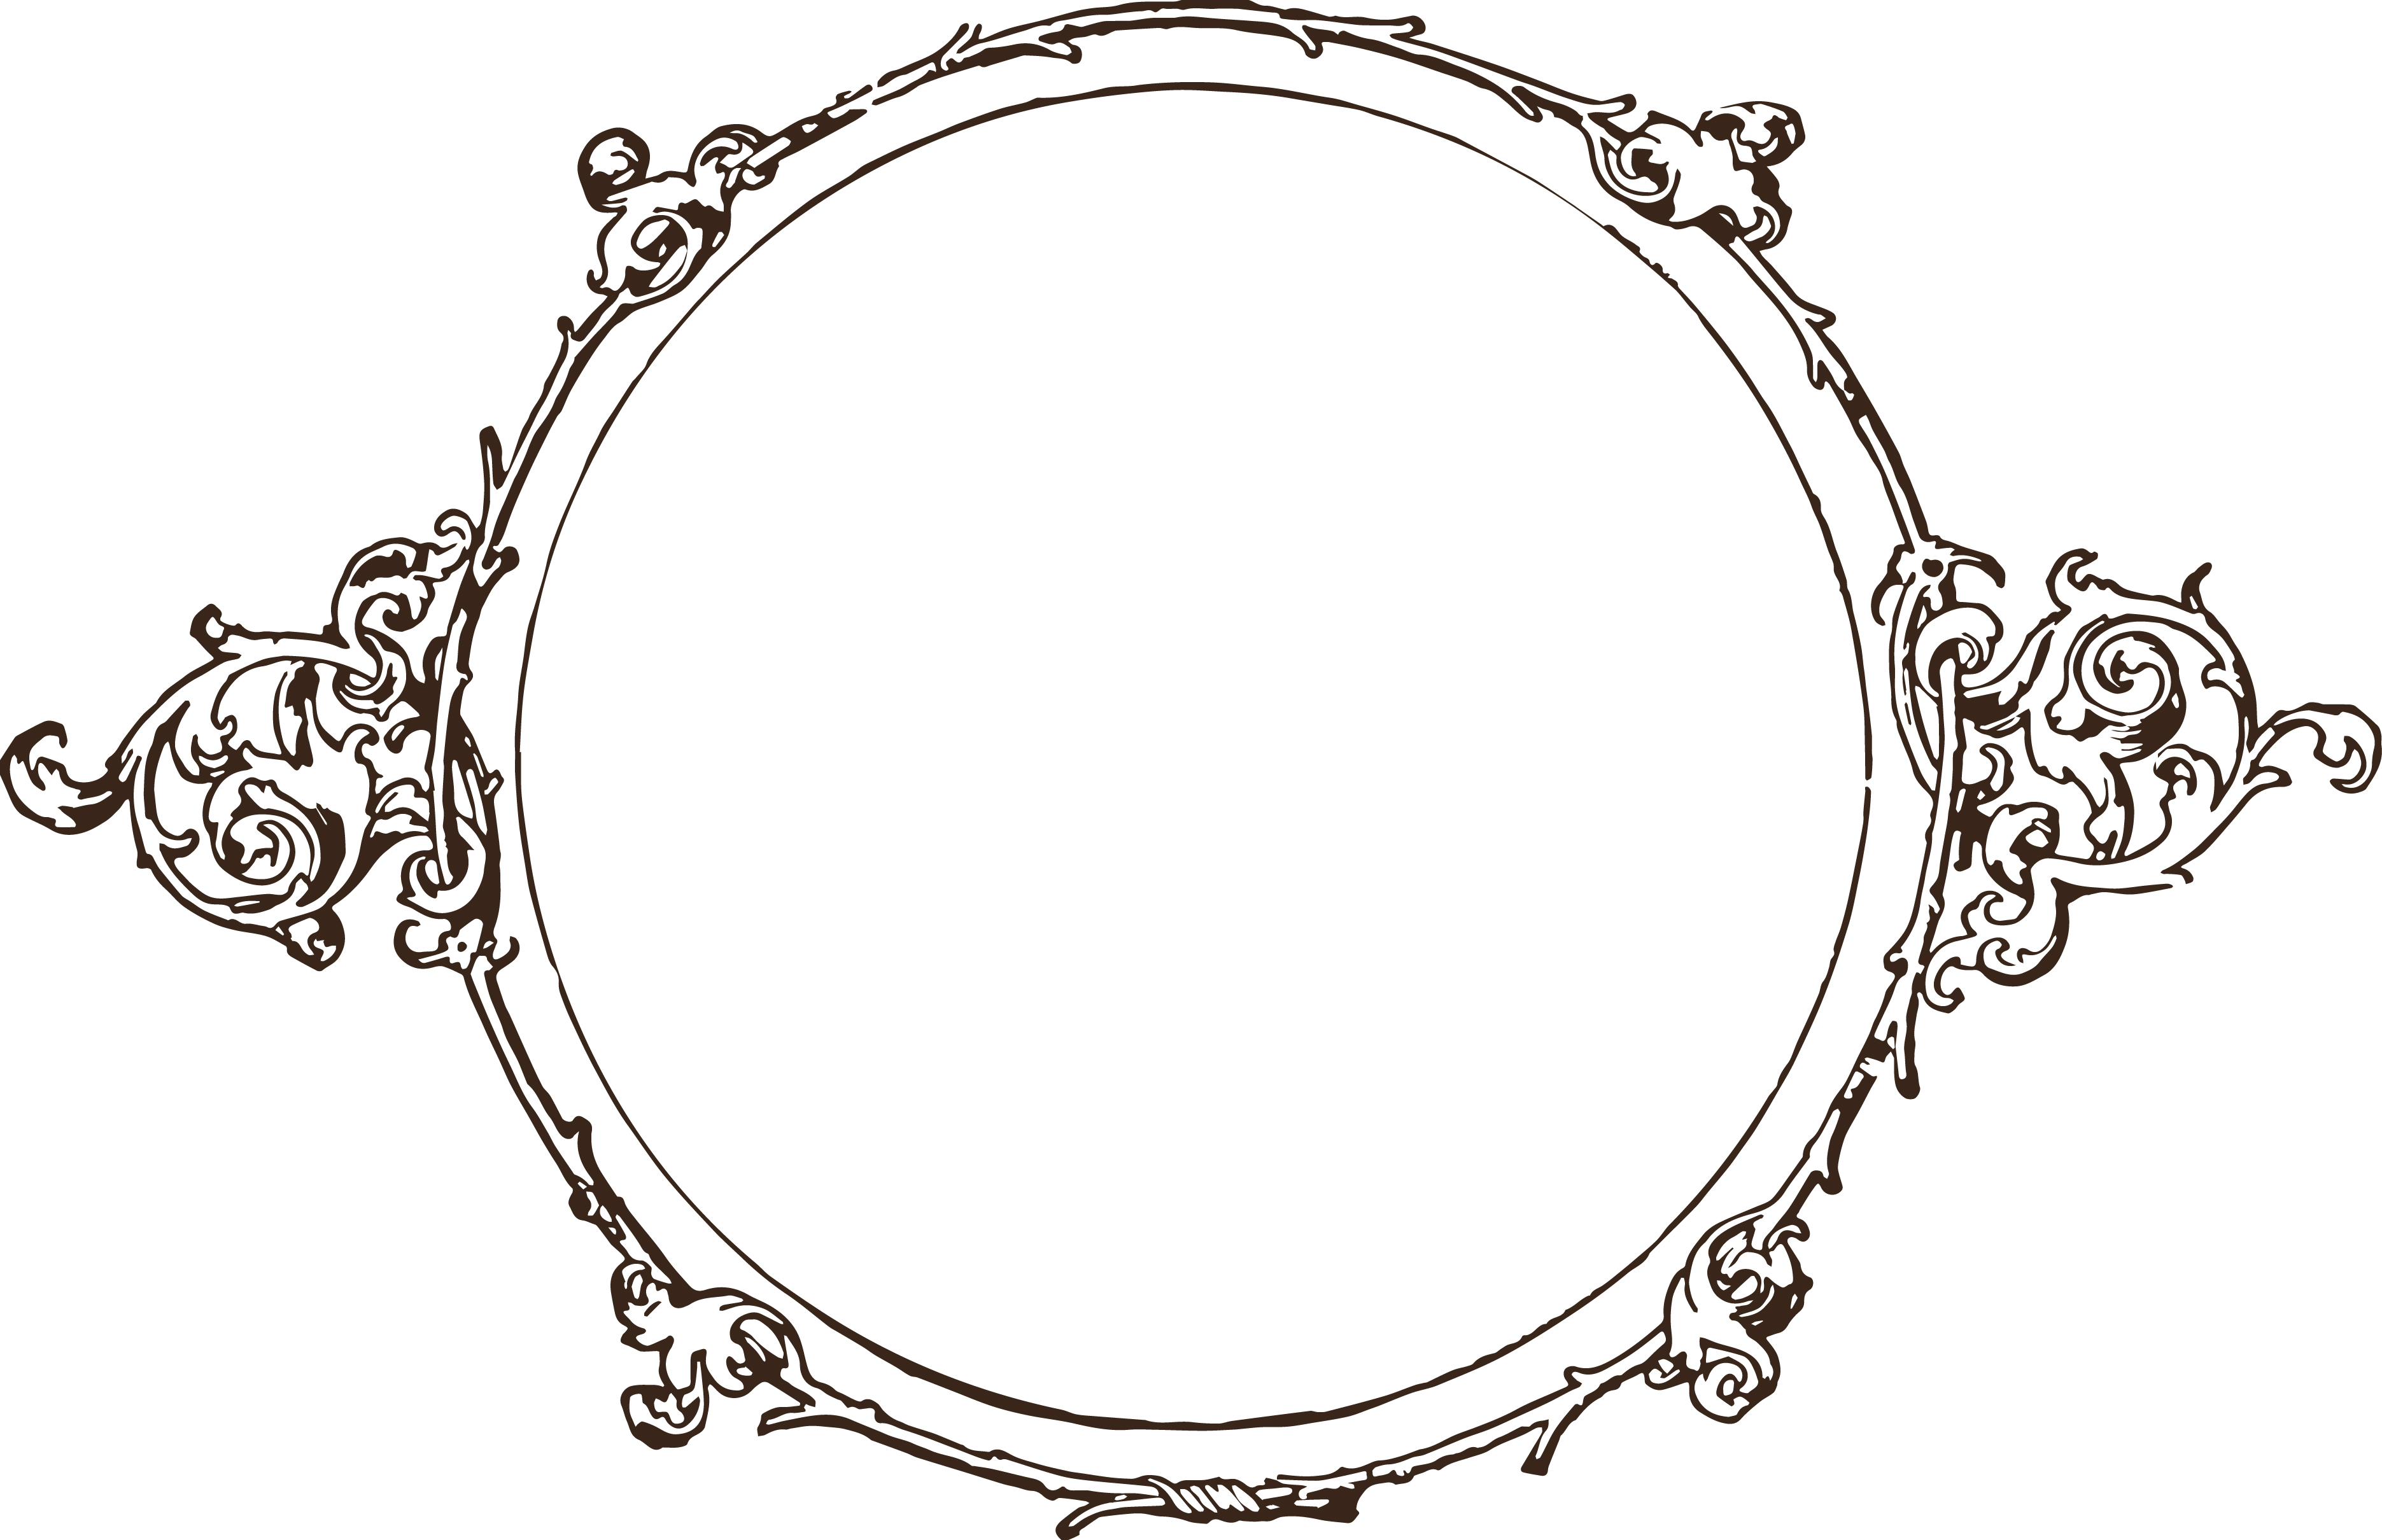 Royalty Free Image - Vintage Scroll Frame | Oh So Nifty Vintage ...